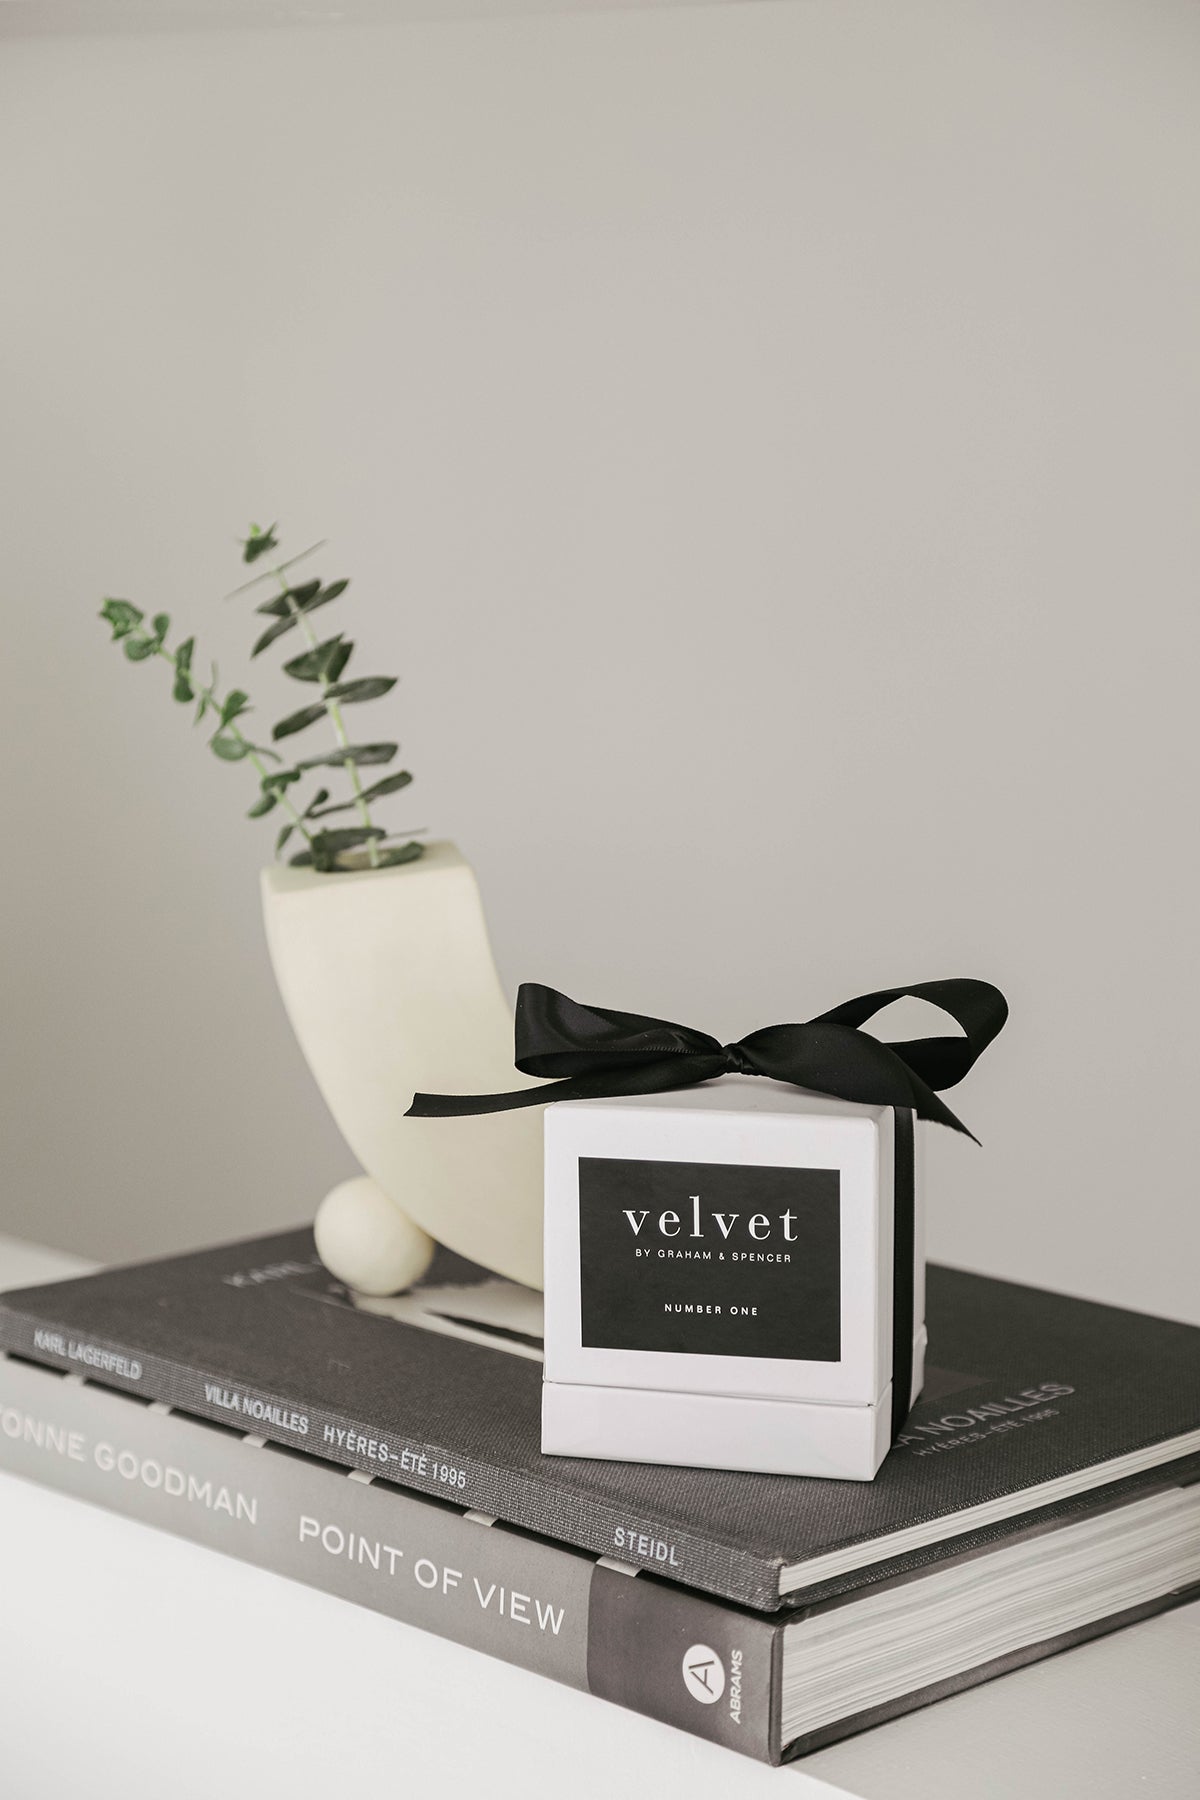 Number One Candle by Velvet in Box on Display-23604799570113